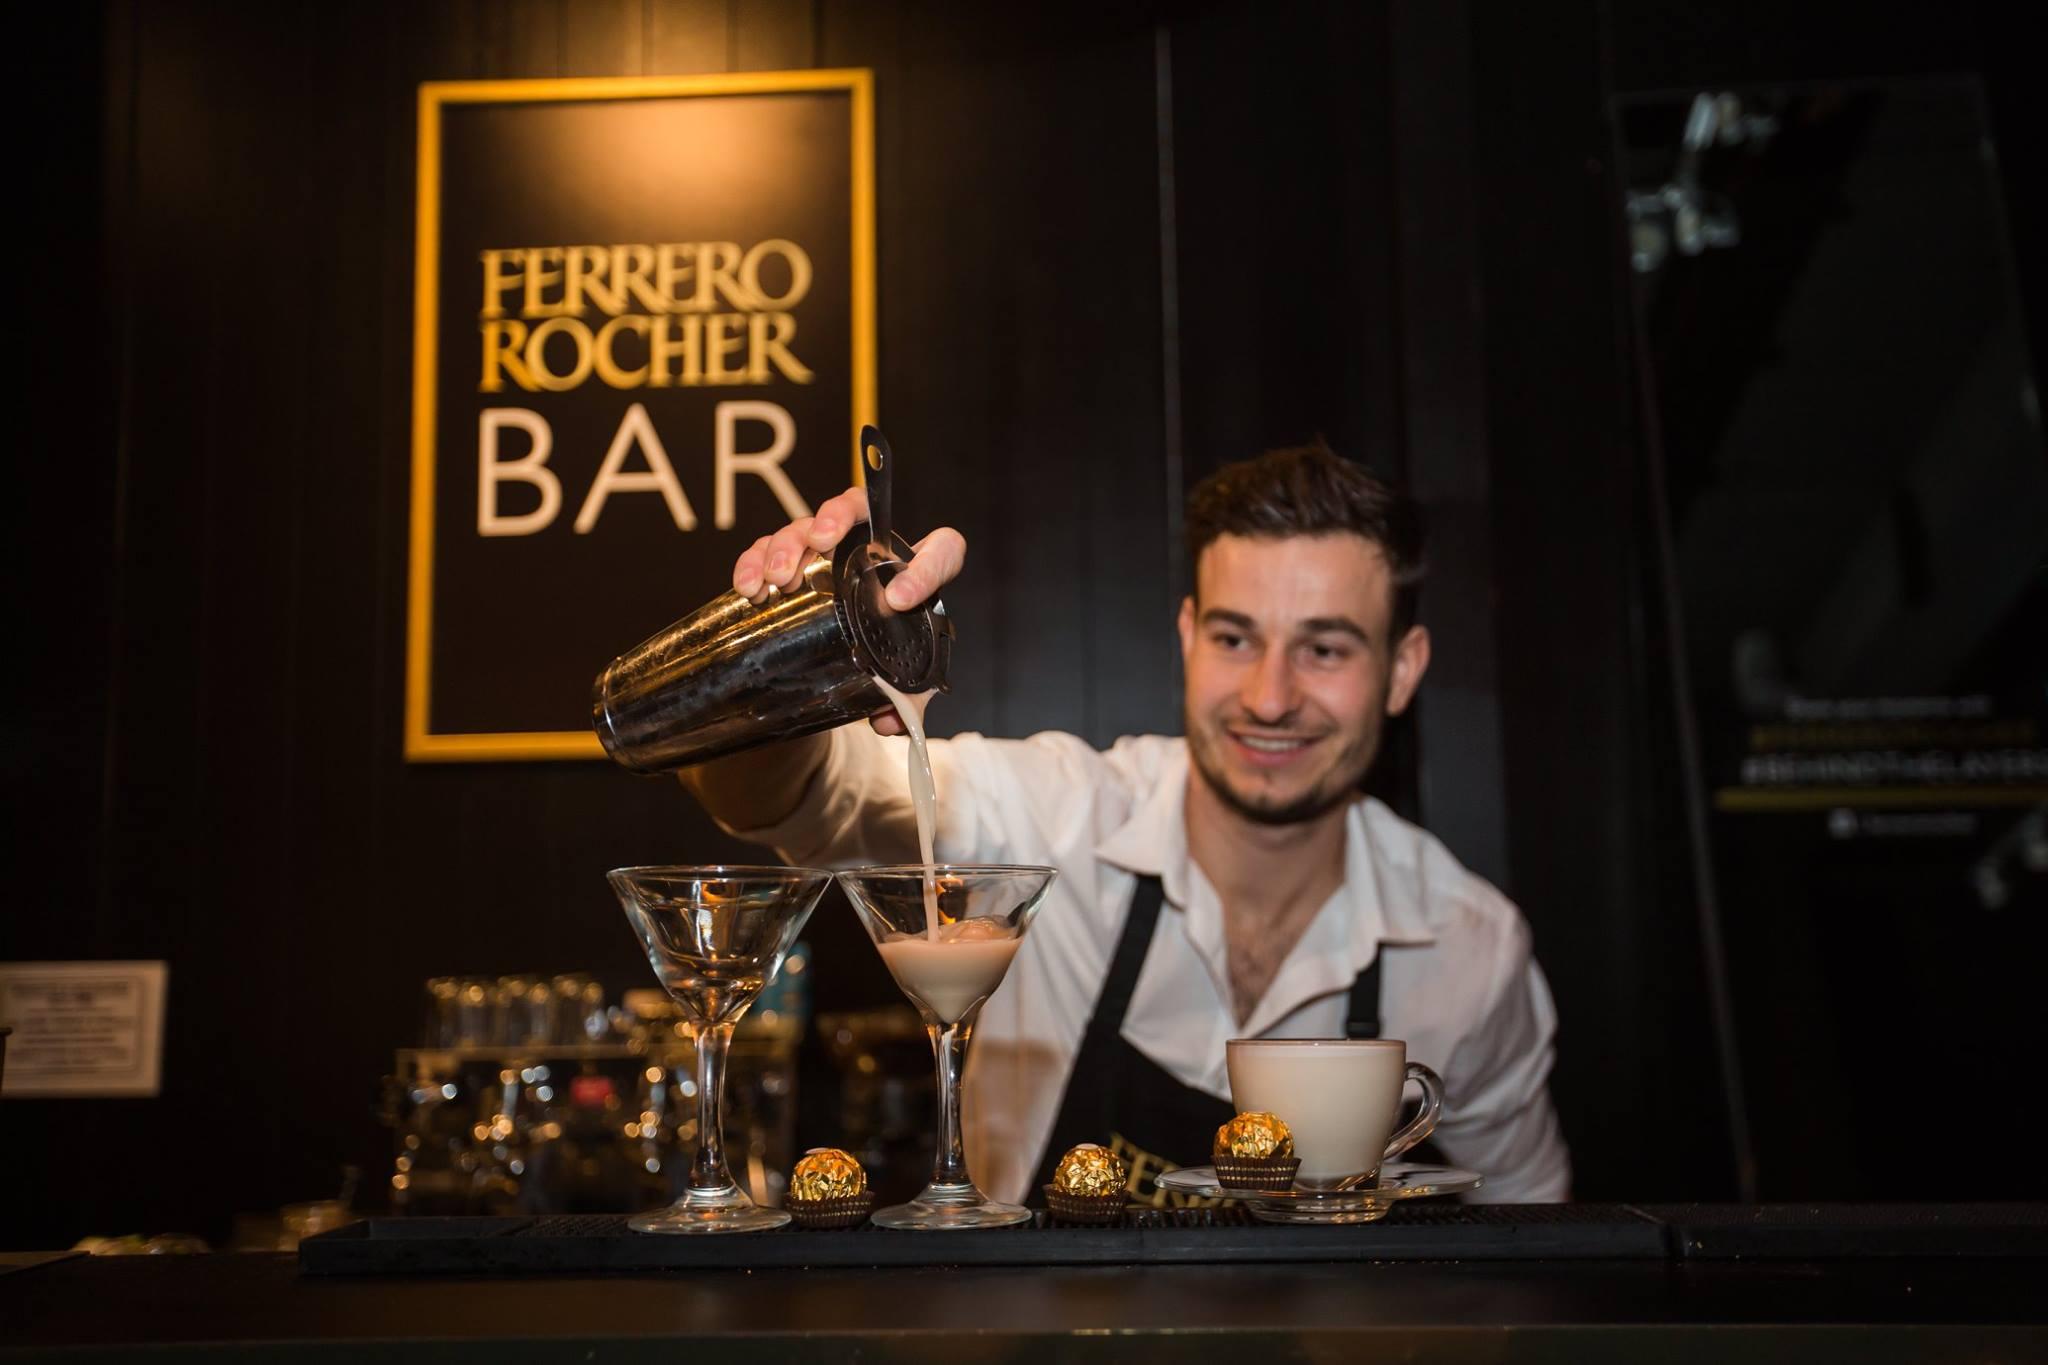 Guests can enjoy Ferrero Rocher-inspired cocktails and mocktails